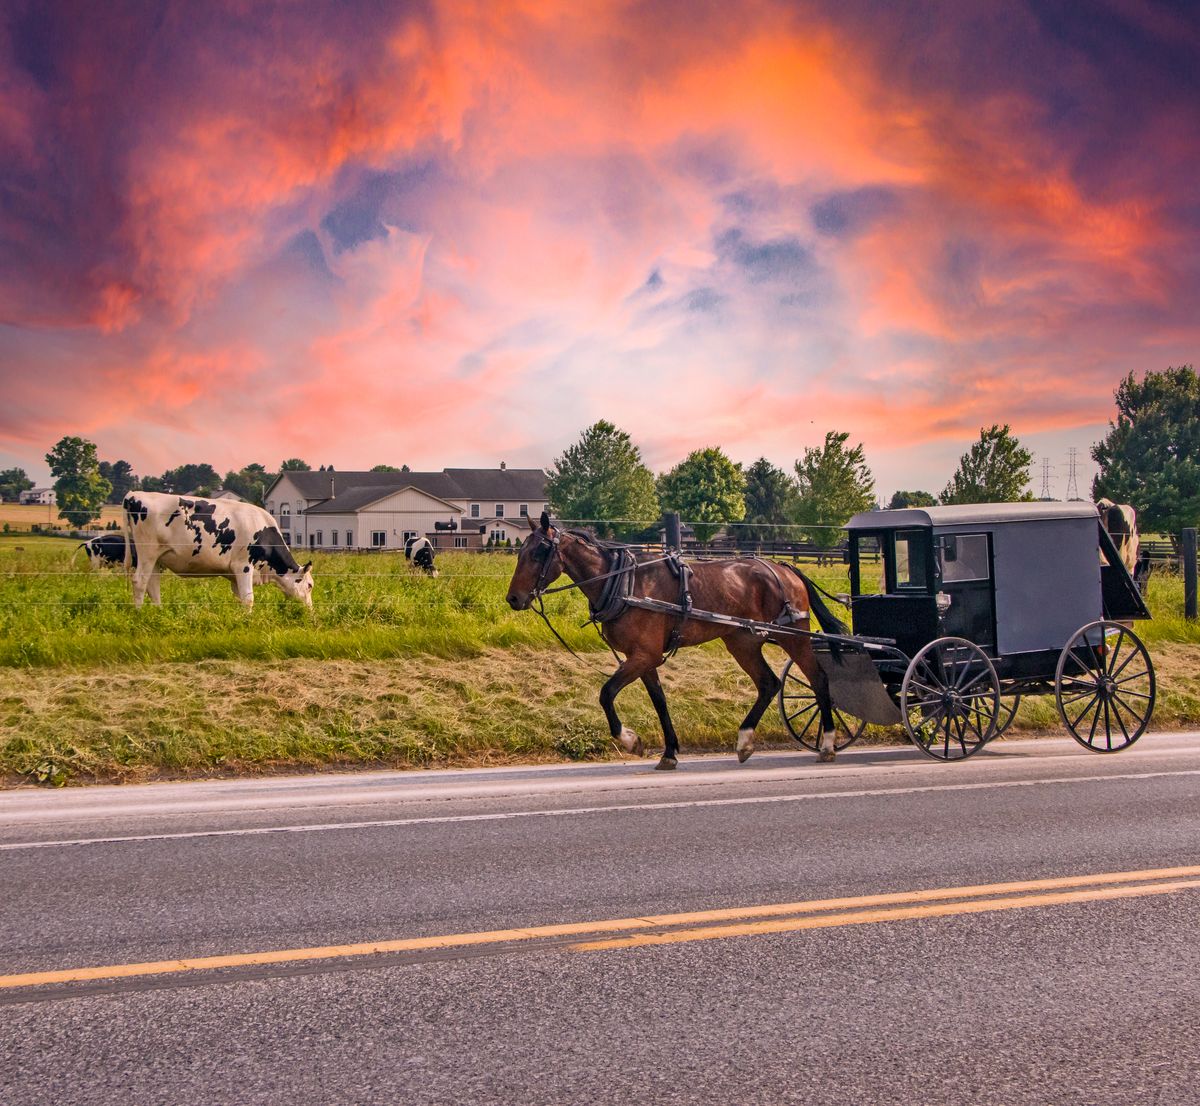 A scenic countryside view at sunset. An Amish horse-drawn buggy is traveling on a road in the foreground. To the left, cows are grazing in a field. The sky is filled with dramatic orange and pink clouds, creating a colorful sunset backdrop. Modern houses are visible in the distance.